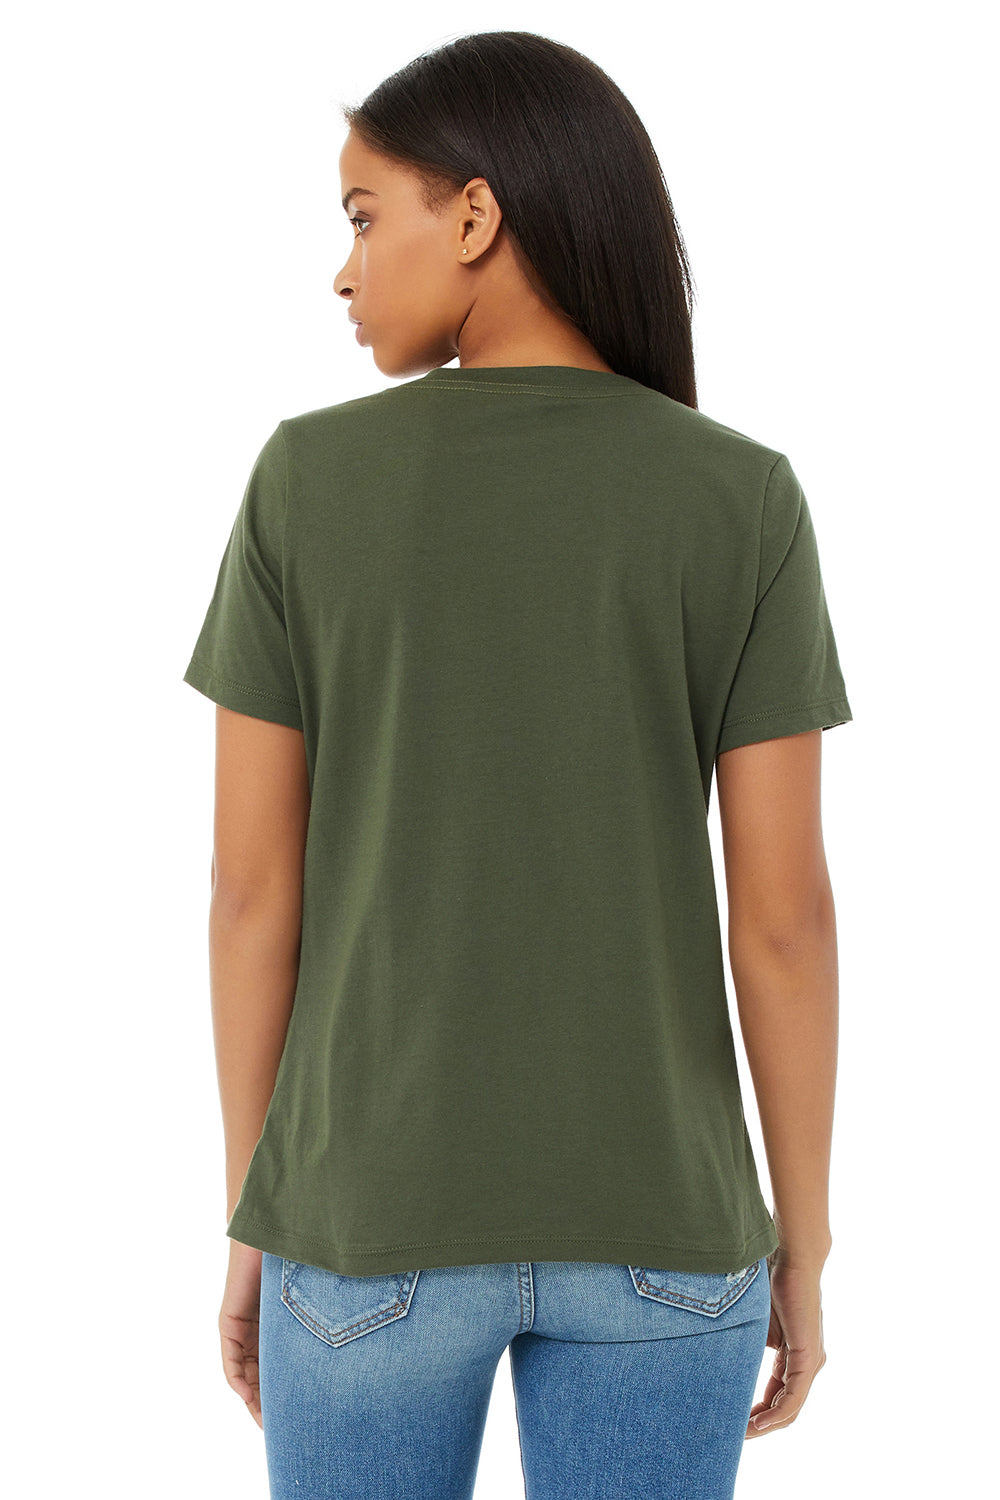 Bella + Canvas BC6405/6405 Womens Relaxed Jersey Short Sleeve V-Neck T-Shirt Military Green Model Back